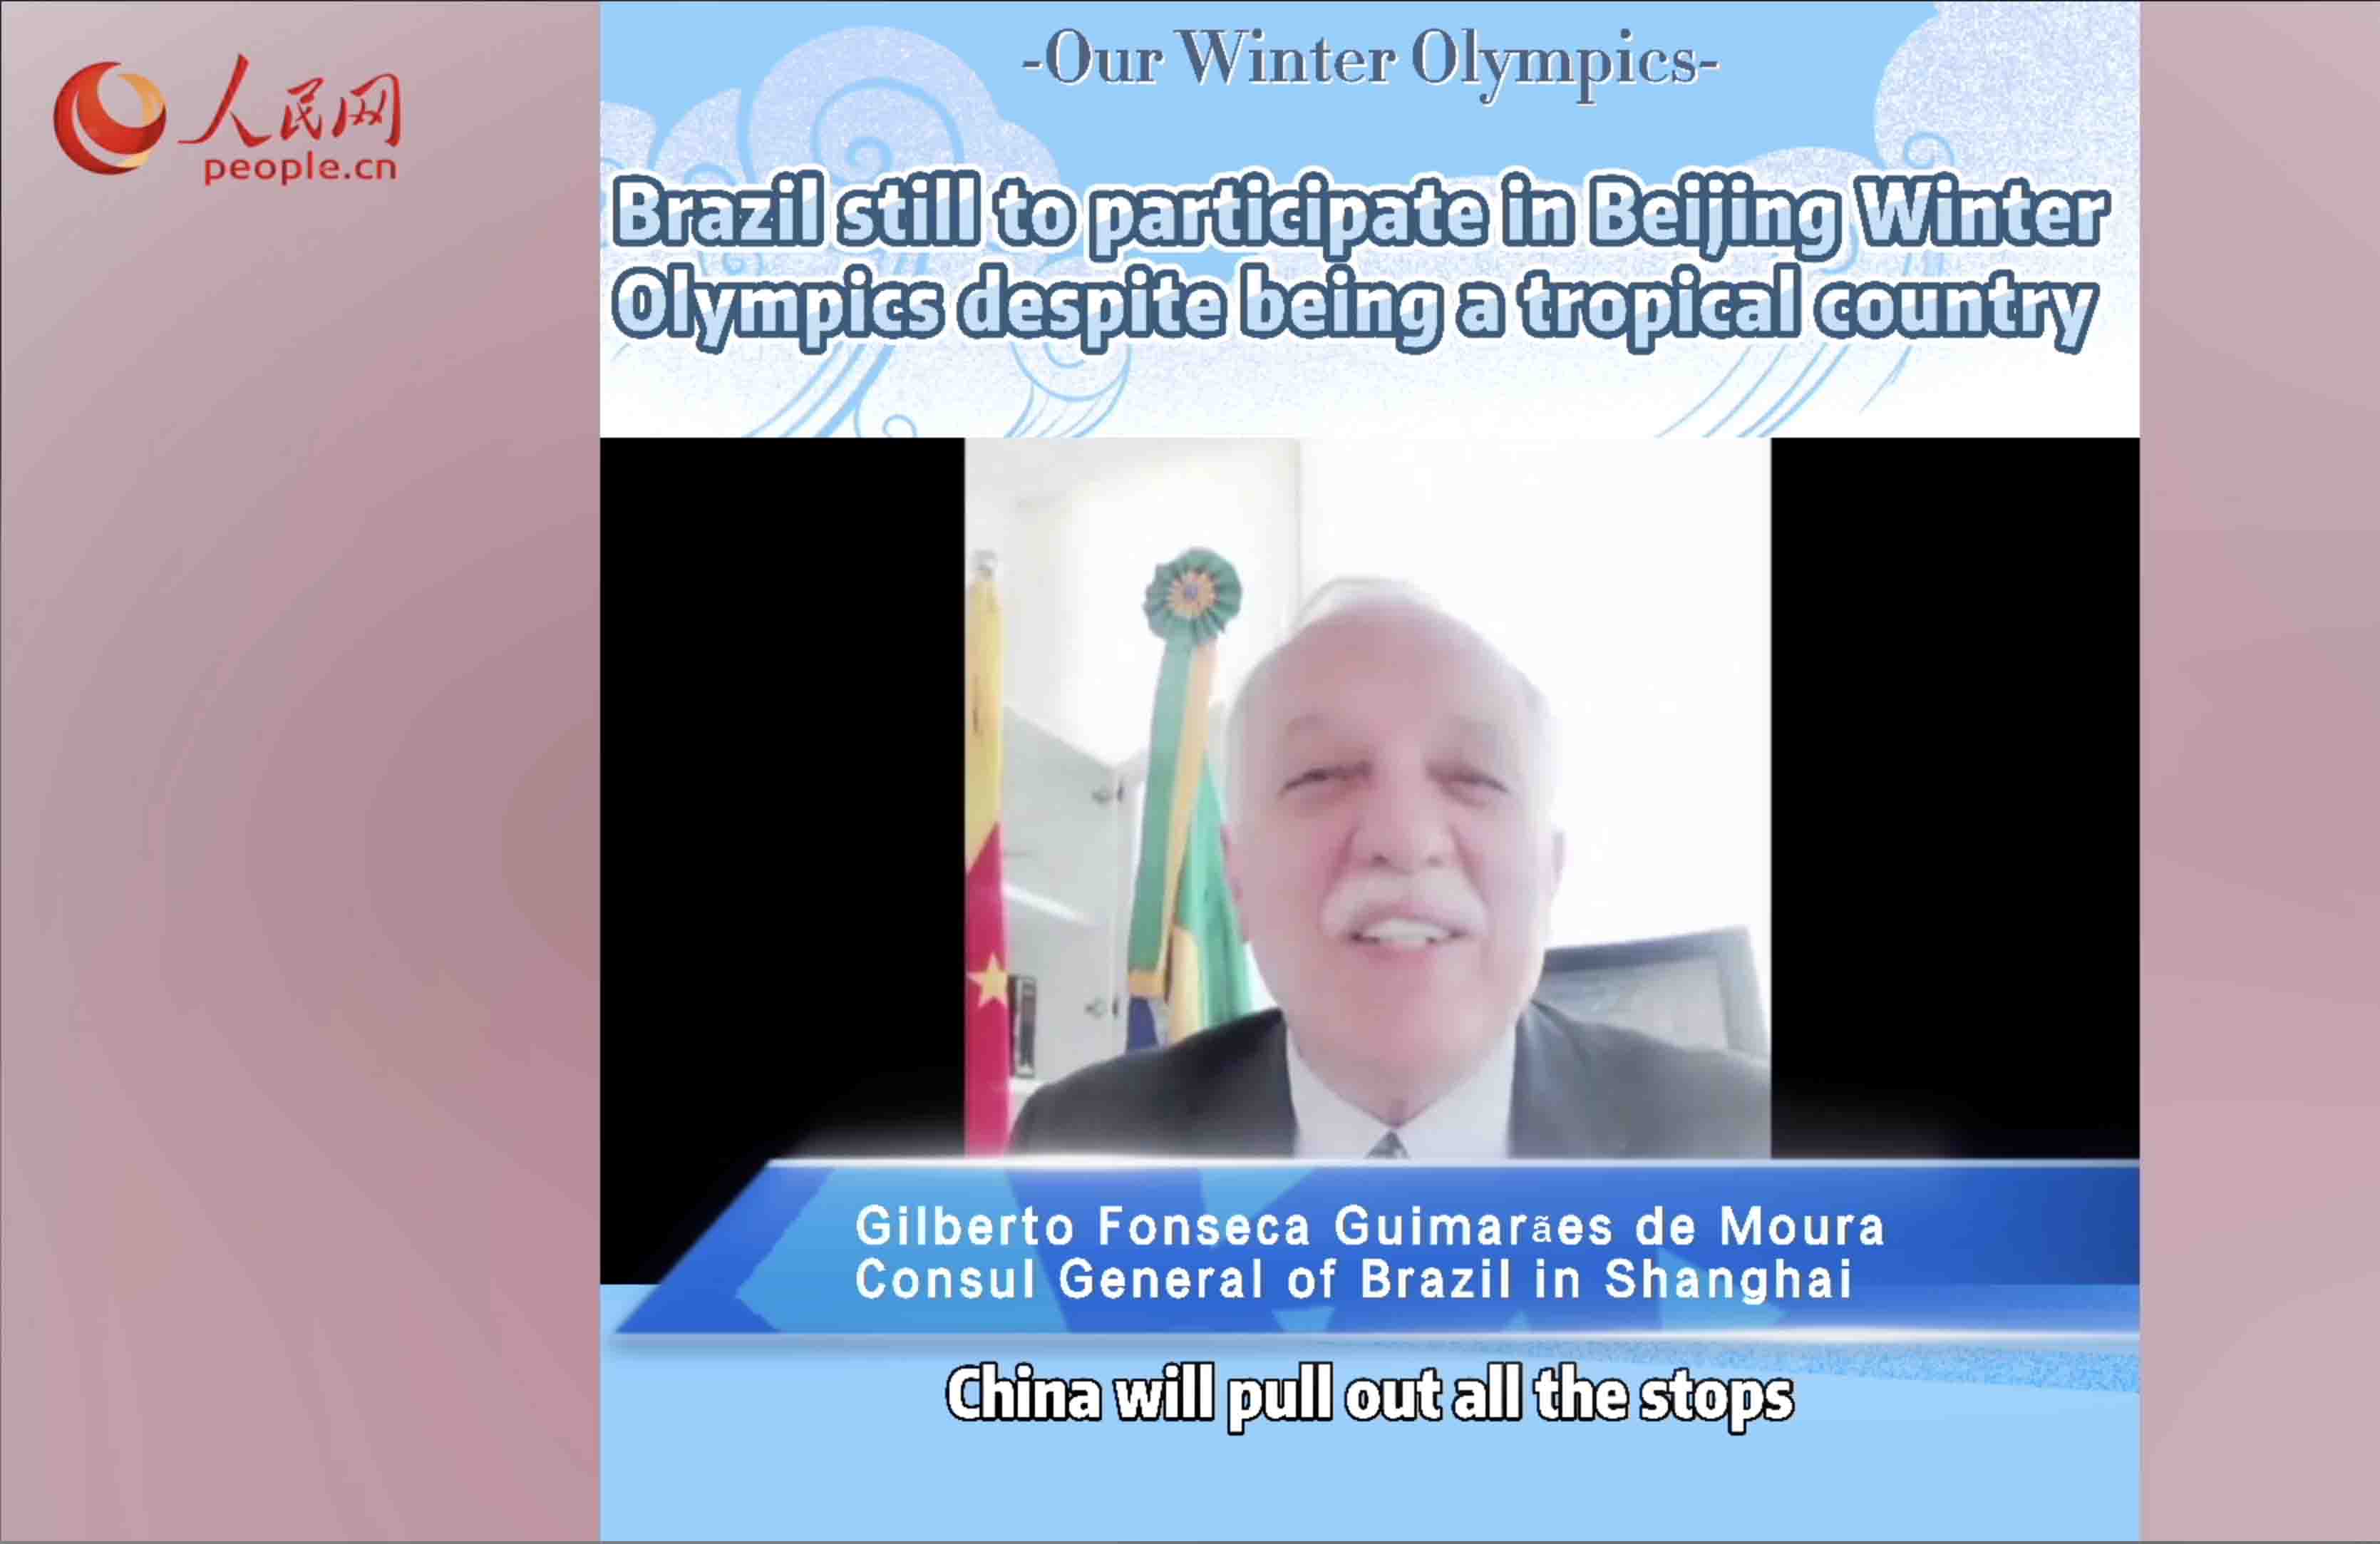 Brazil still to participate in Beijing Winter Olympics despite being a tropical country